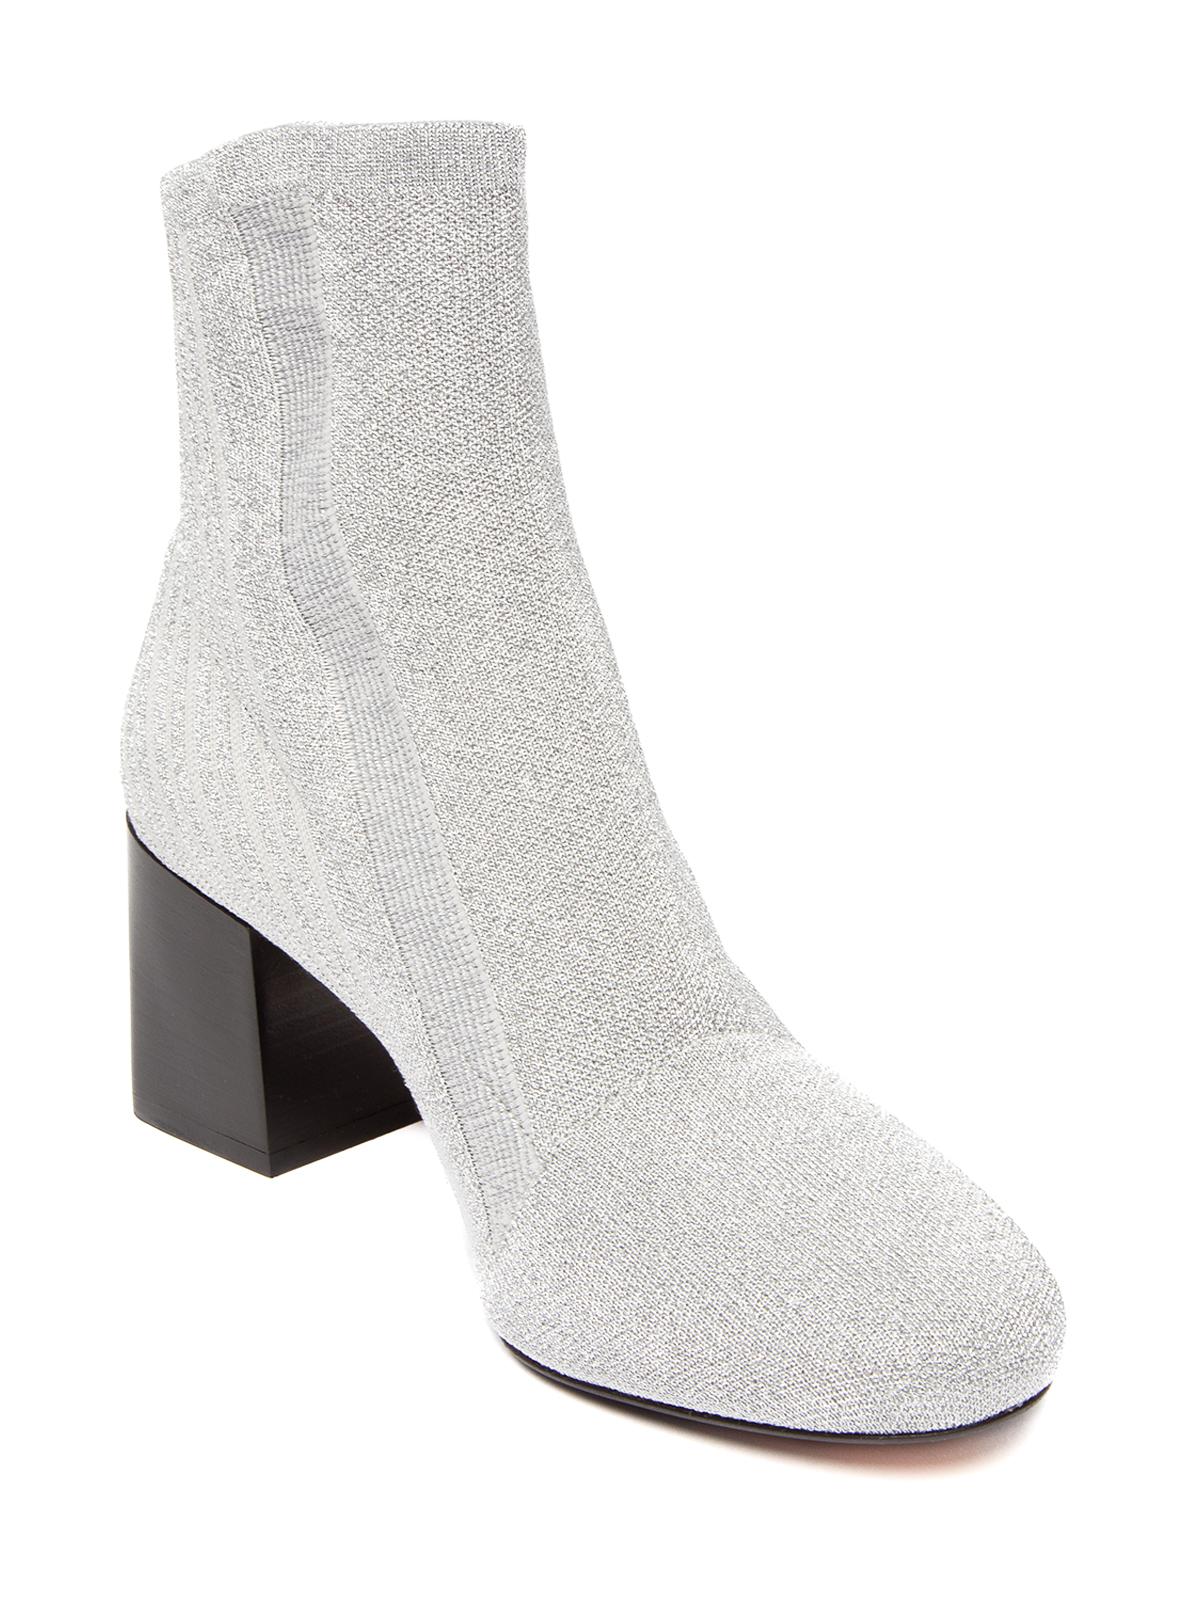 CONDITION is Never worn, with tag. No wear to heels is evident on this brand new Sportmax designer resale item. Visible damage to the box. Details Silver Cloth Block heel Round toe Sock boot style Box & Dustbag included Made in Italy Composition